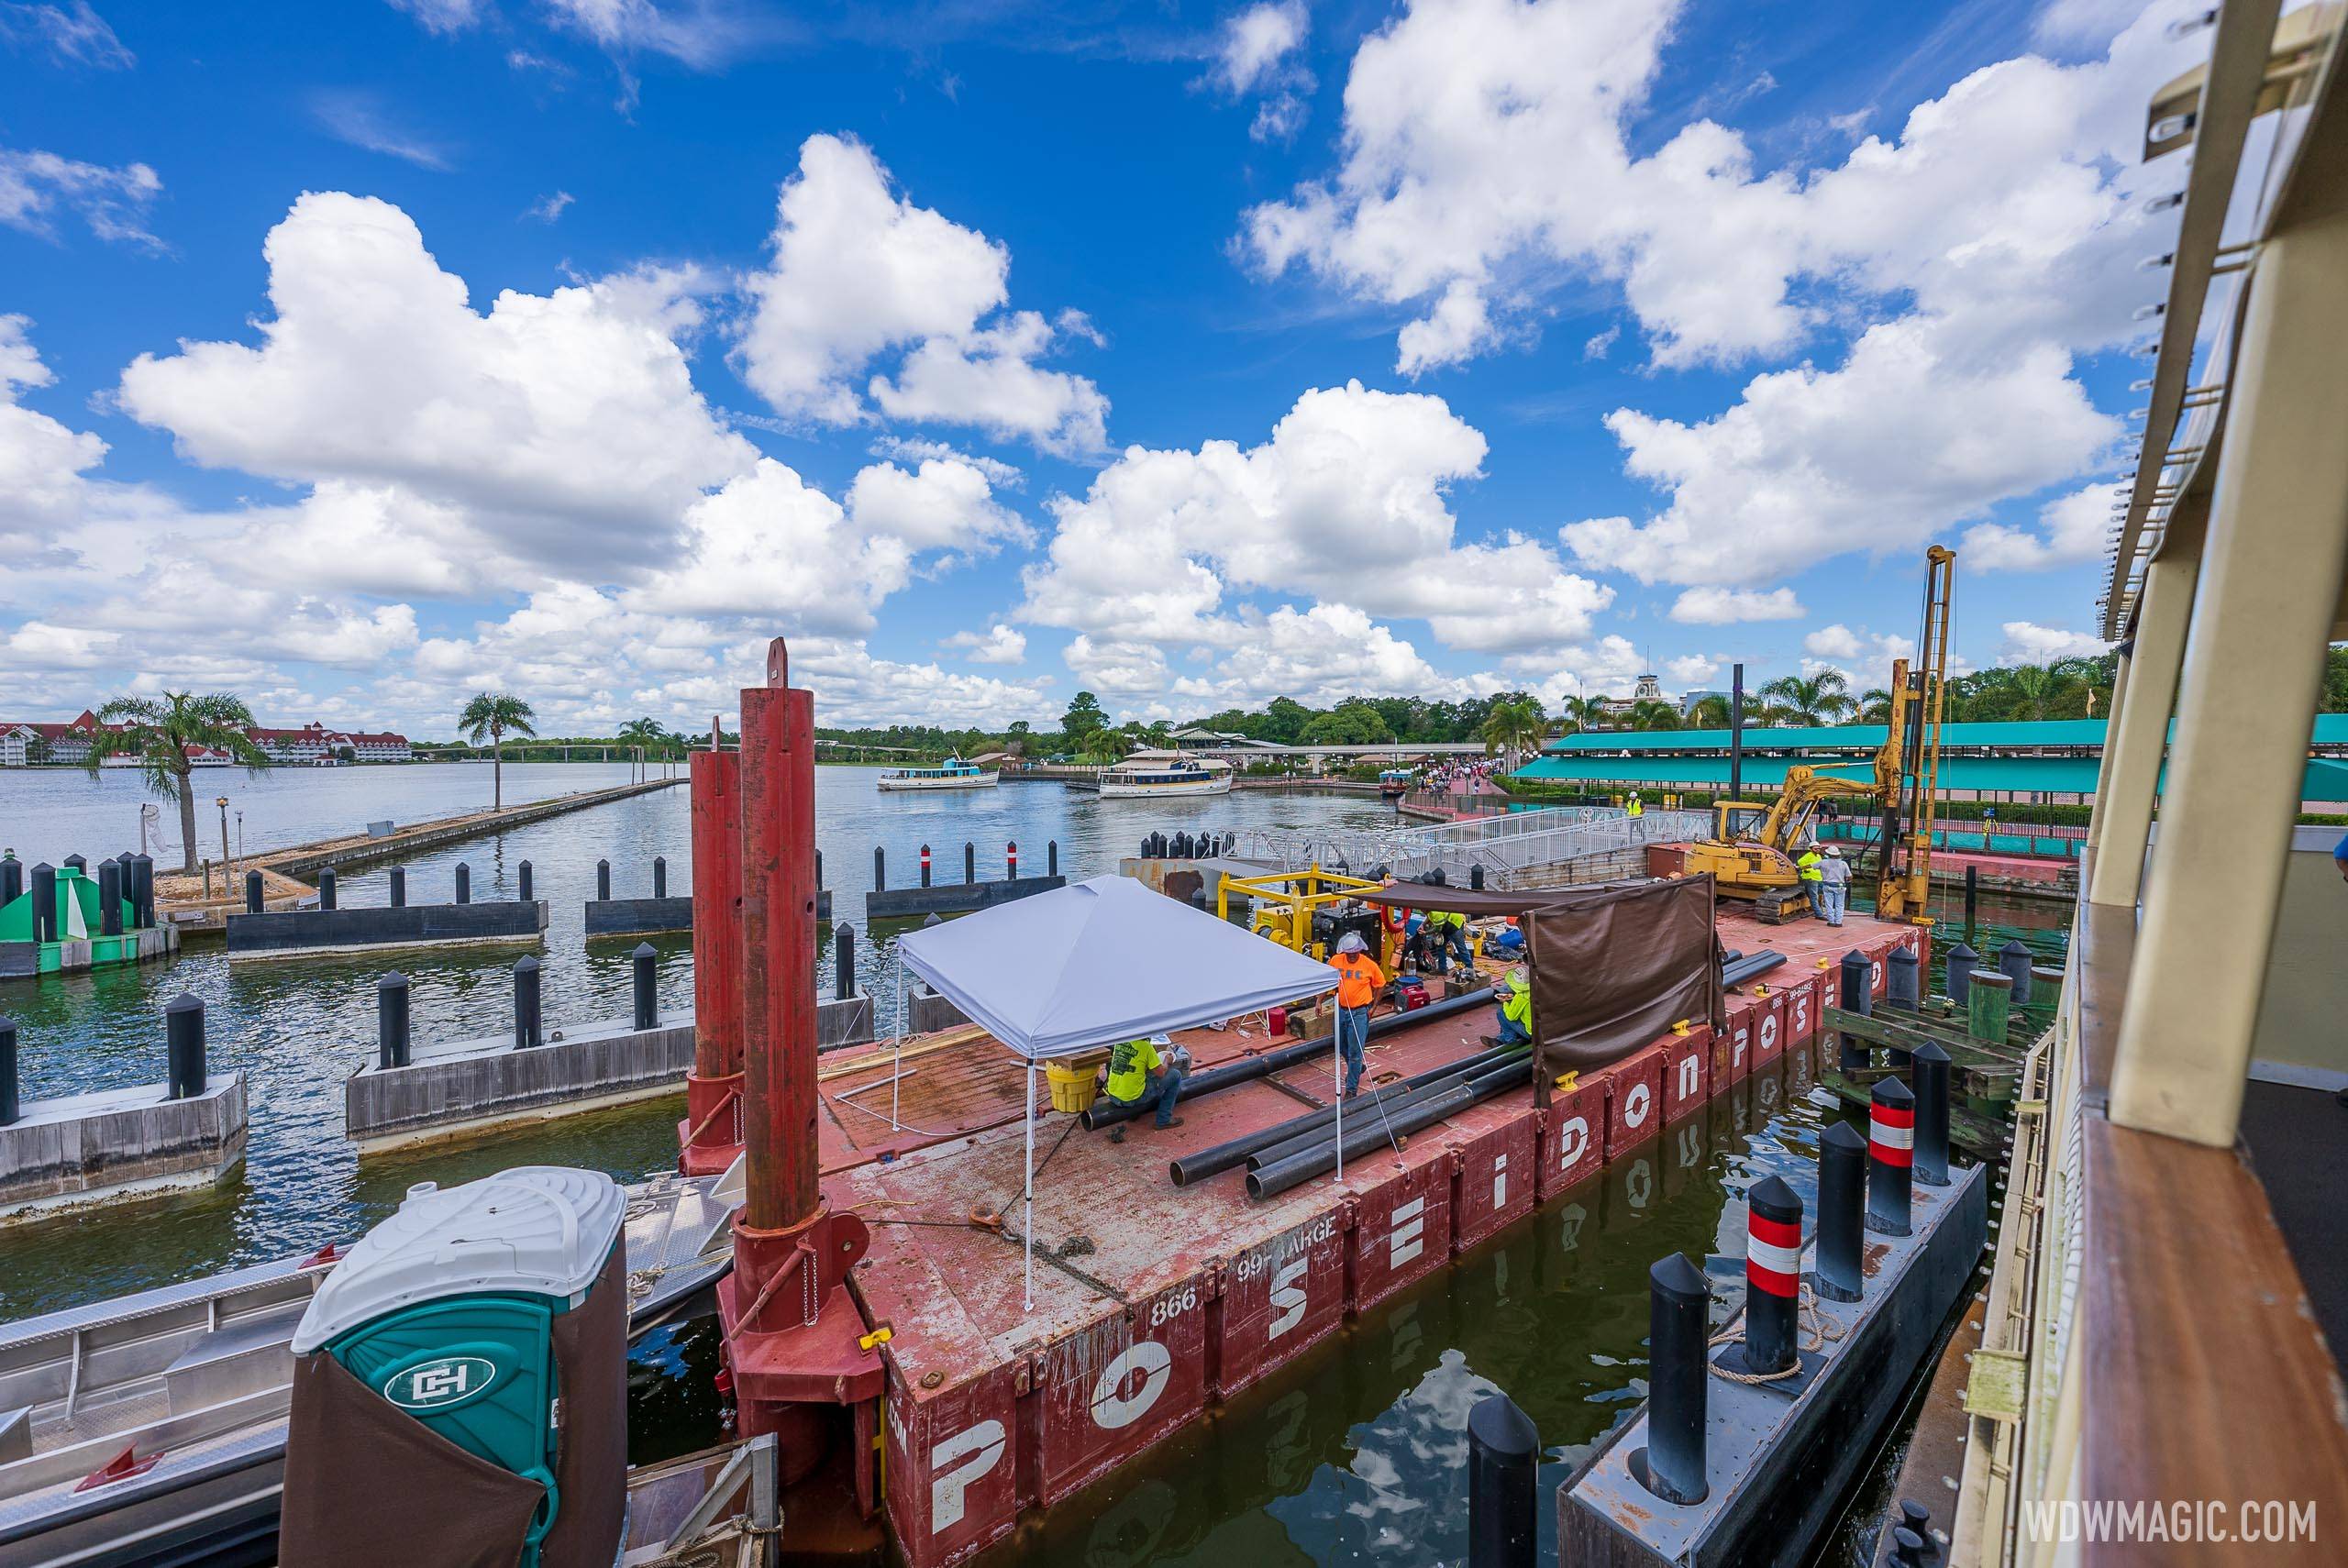 Crews working on the Magic Kingdom Ferry Boat dock installing new pilings